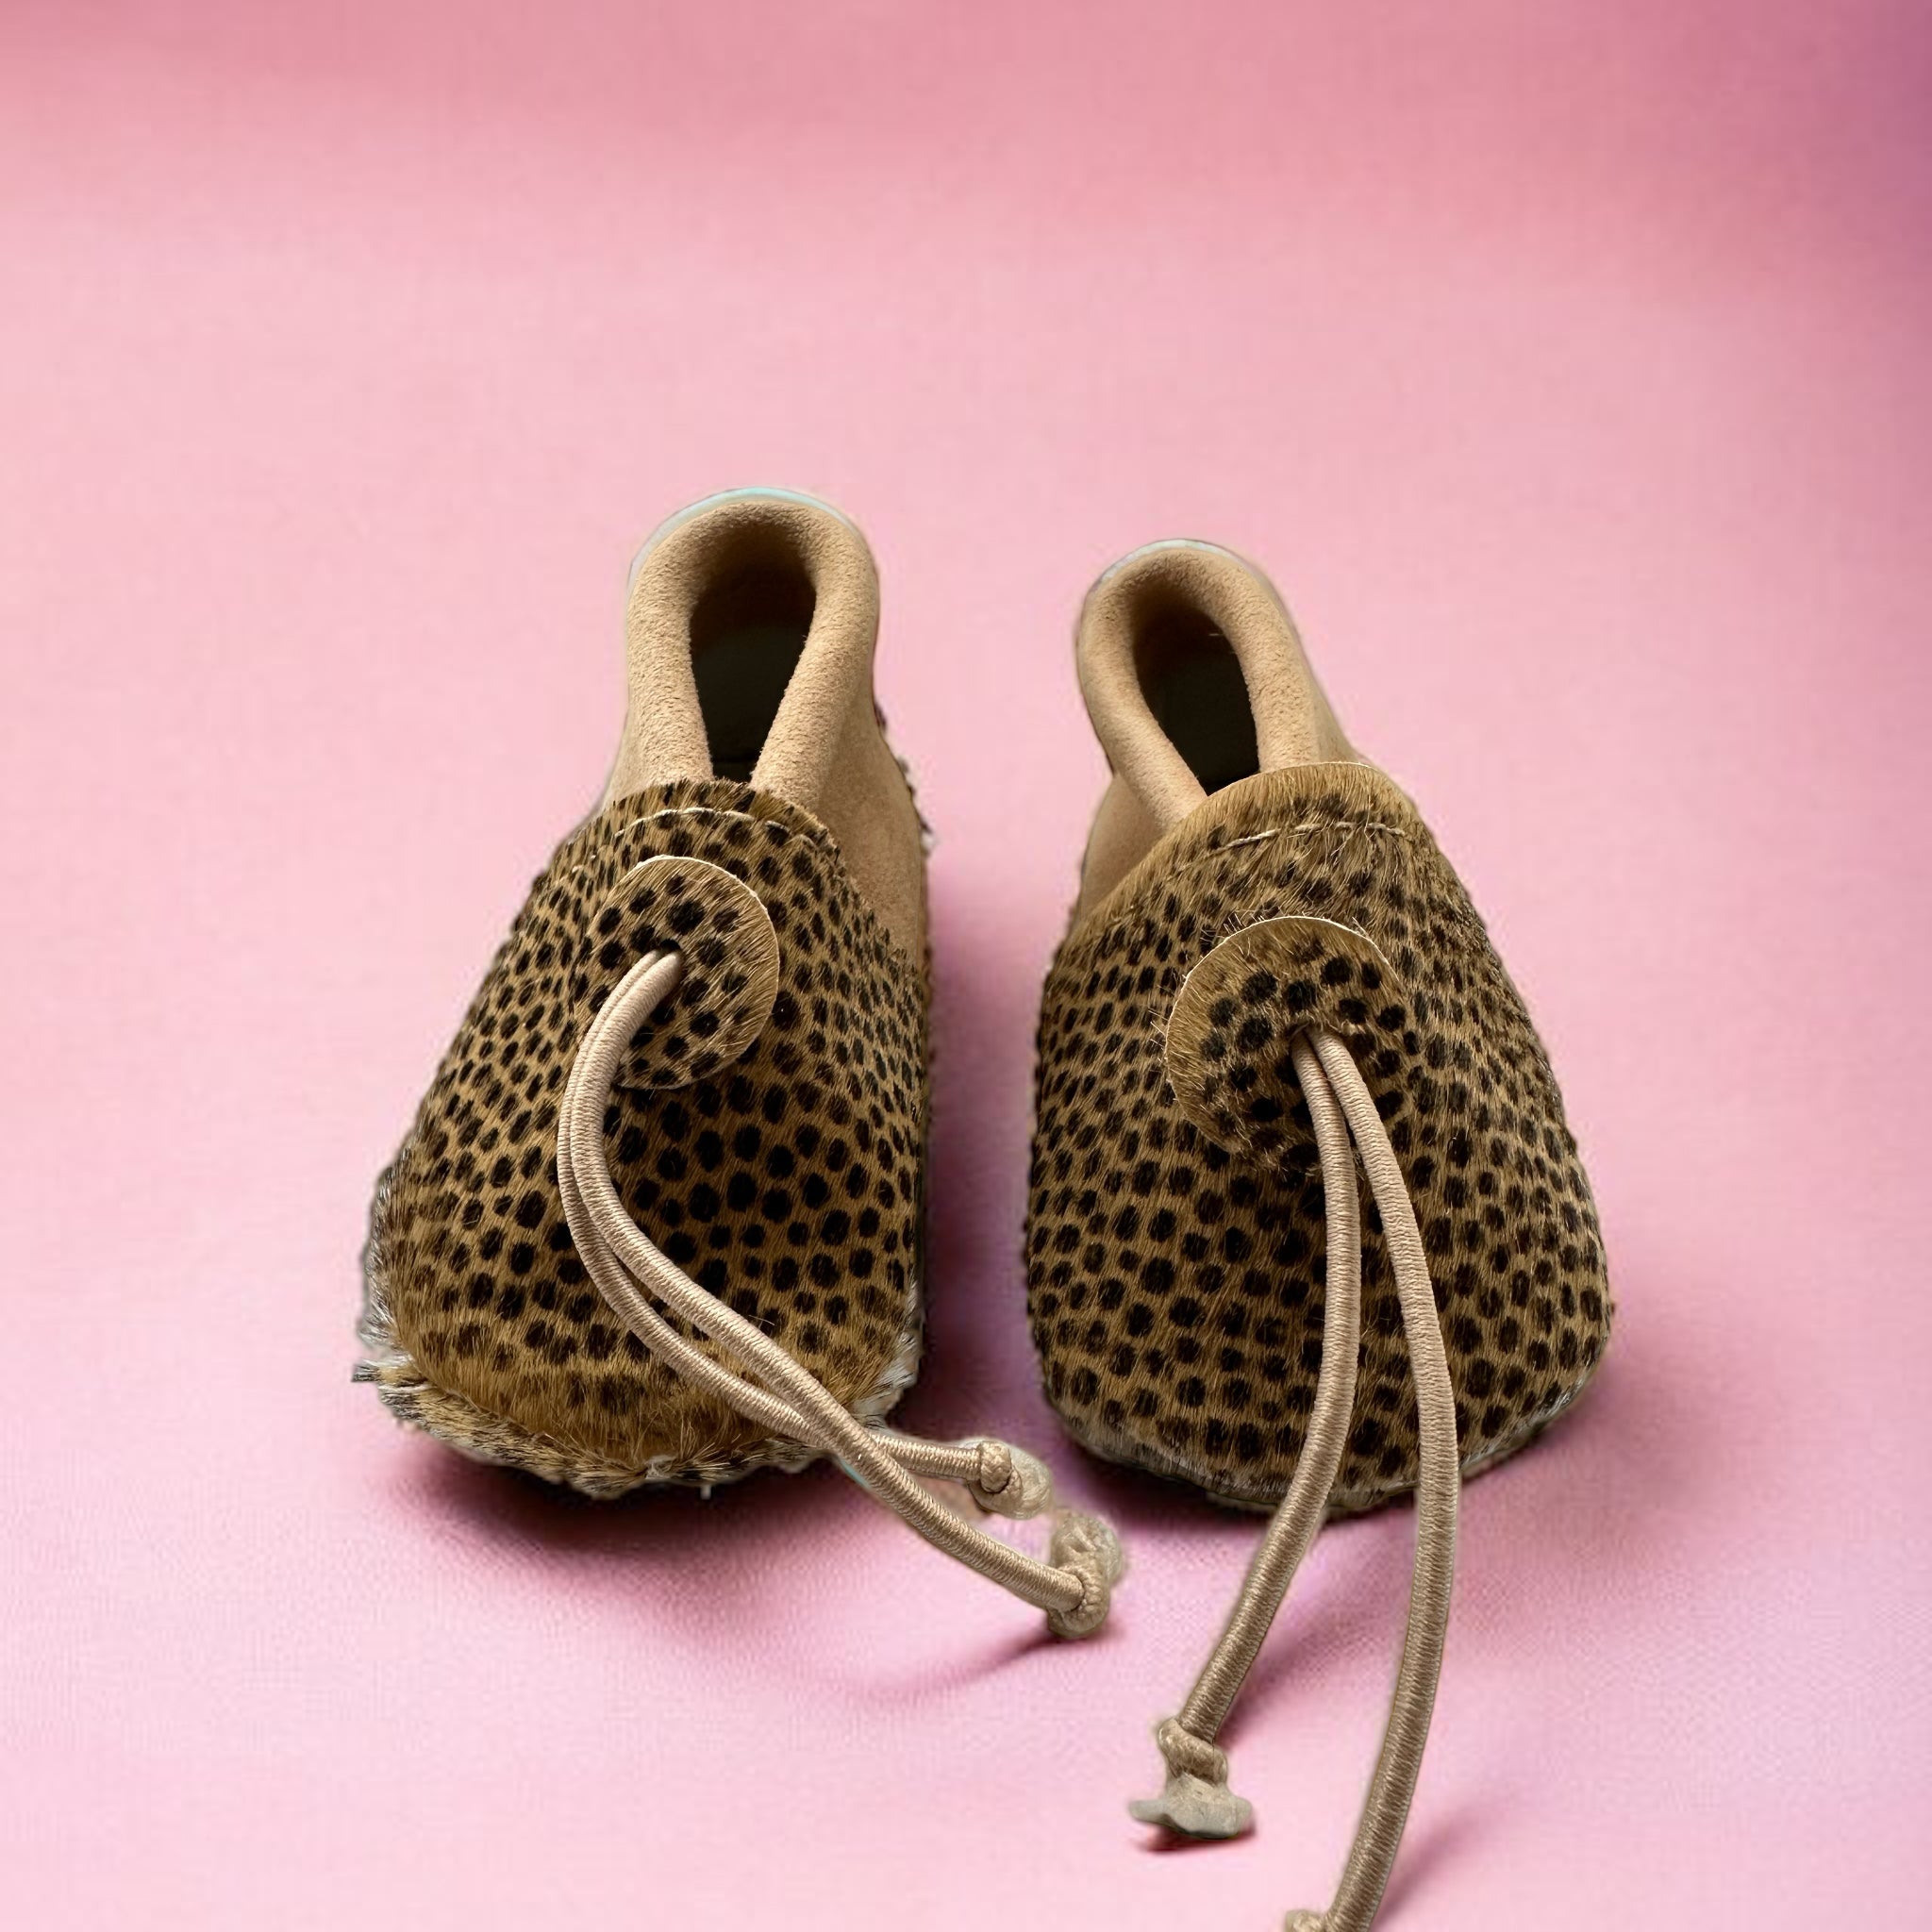 NEW: Mini leather baby shoes in three versions